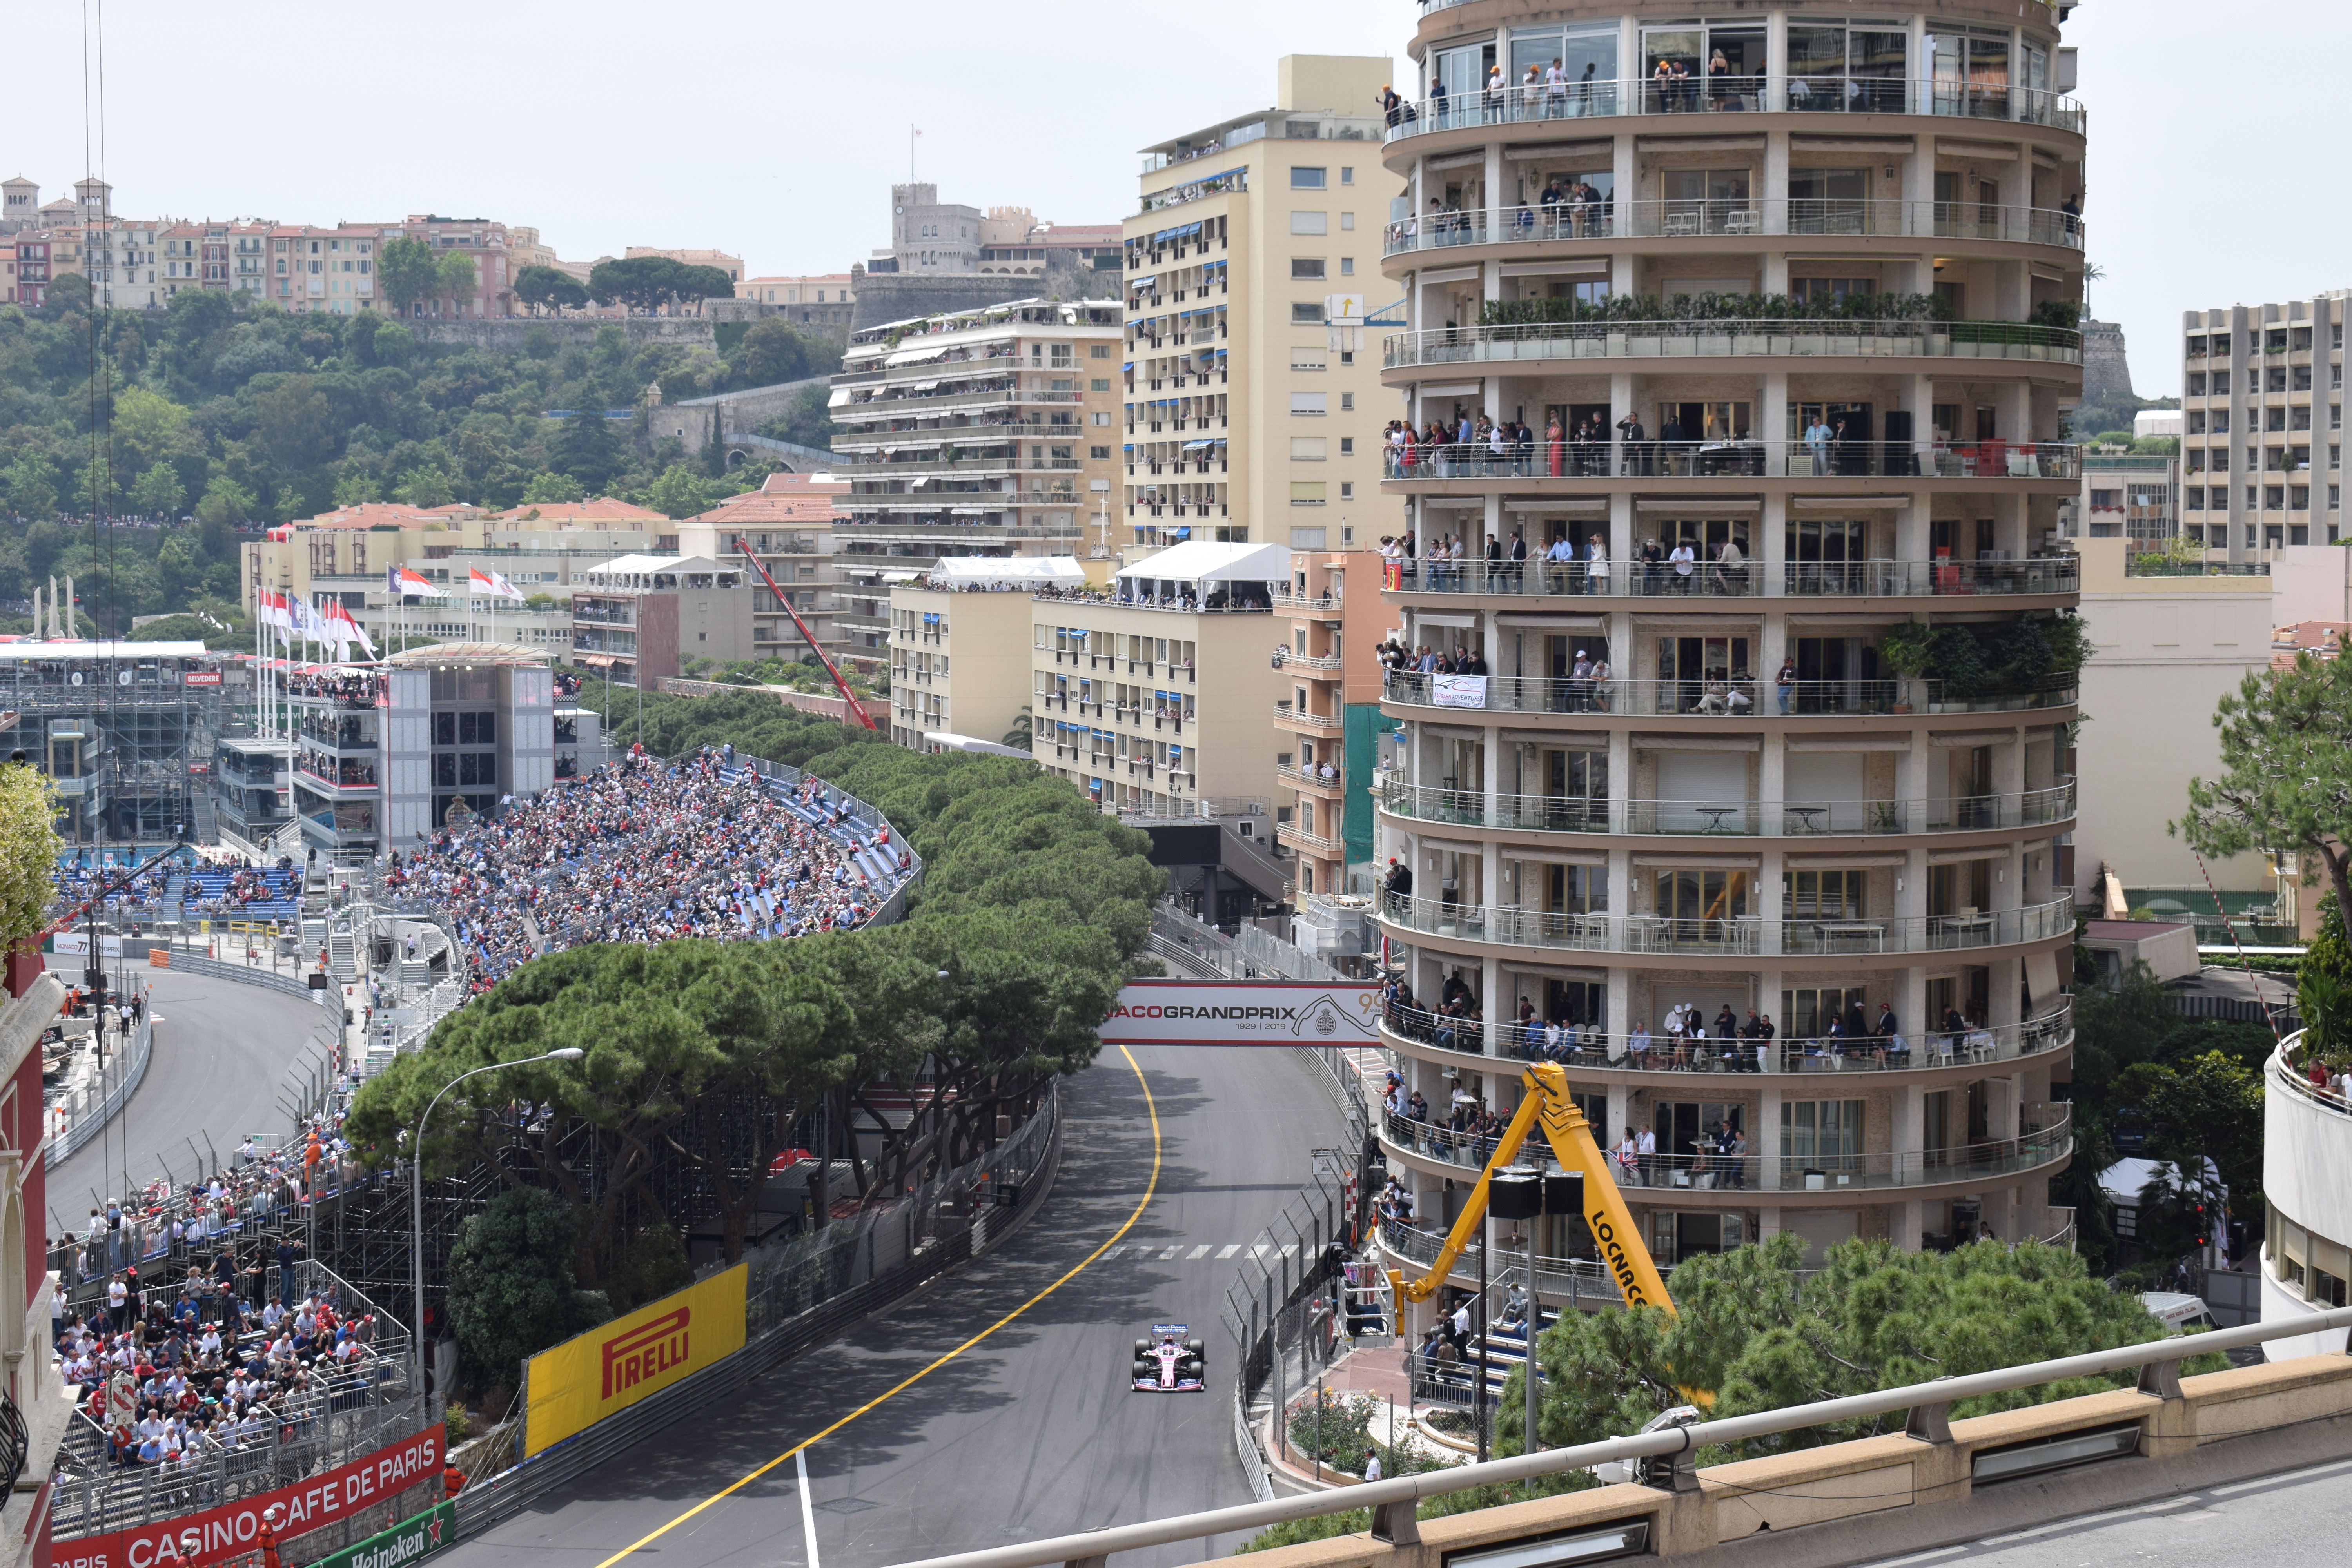 Image of people watching the race from a tower 